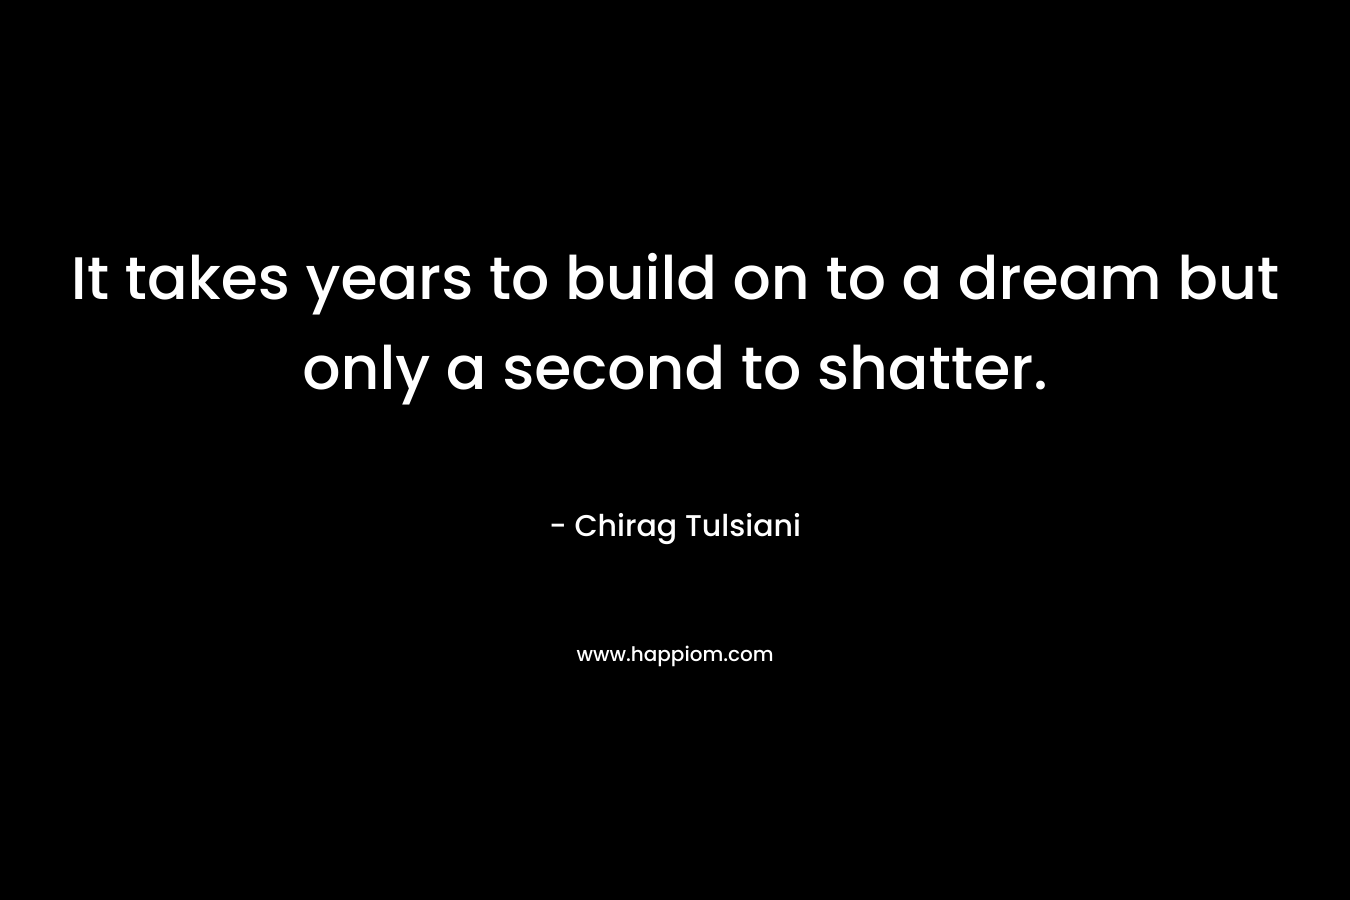 It takes years to build on to a dream but only a second to shatter.